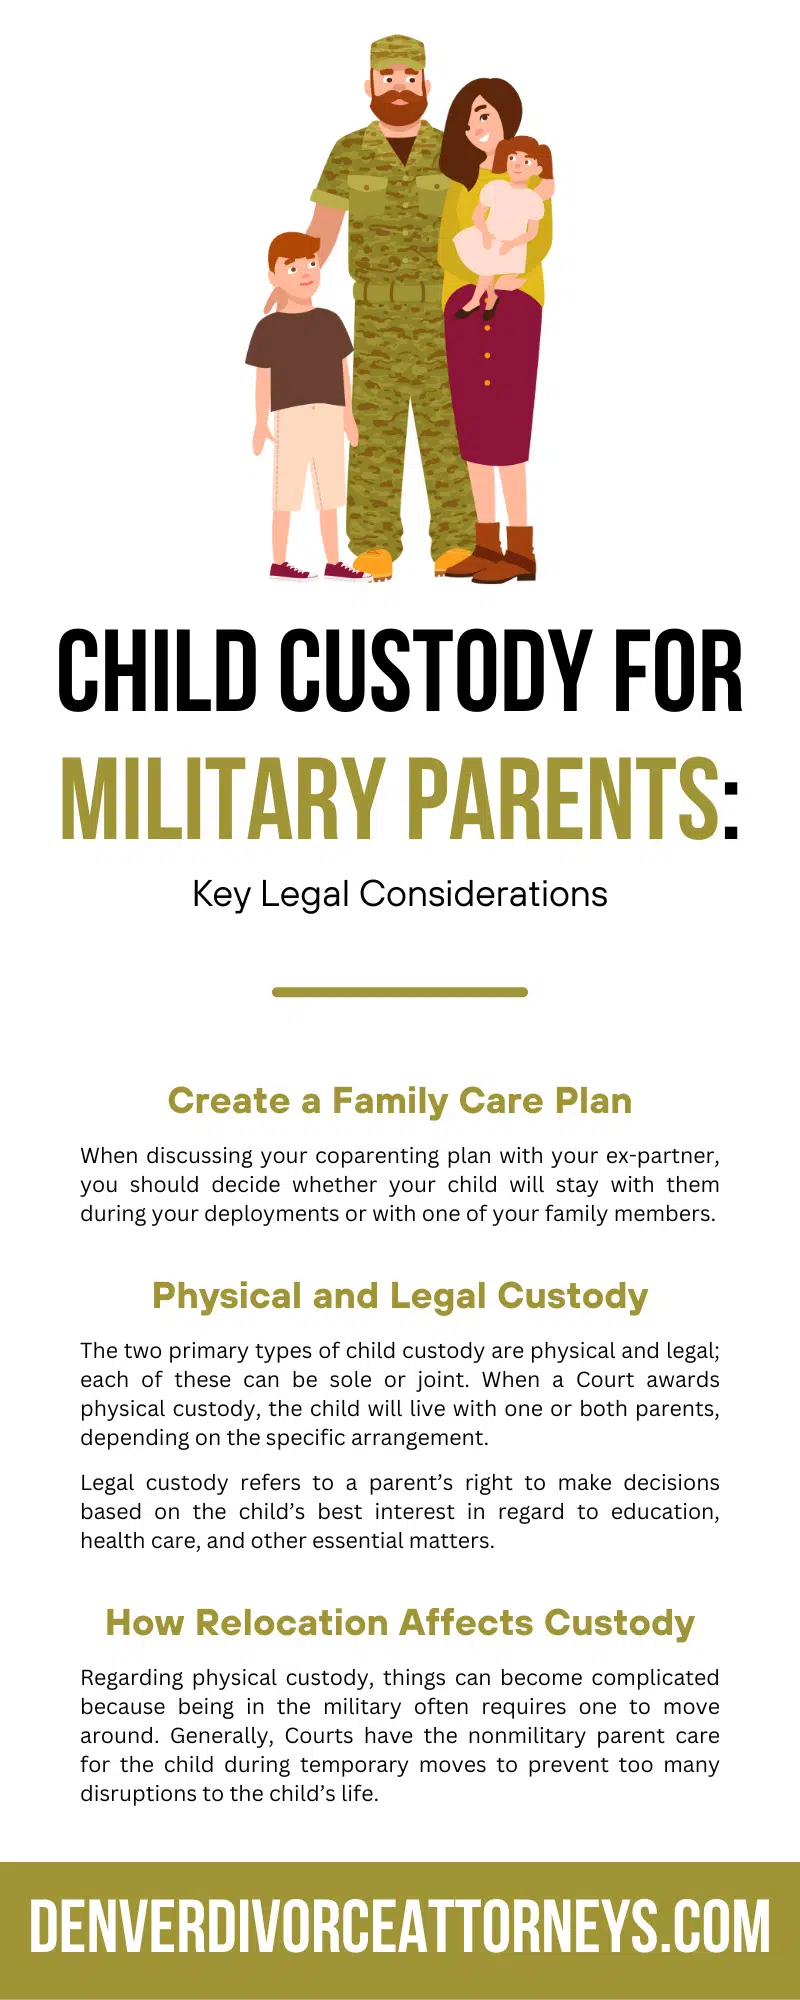 Child Custody for Military Parents: Key Legal Considerations